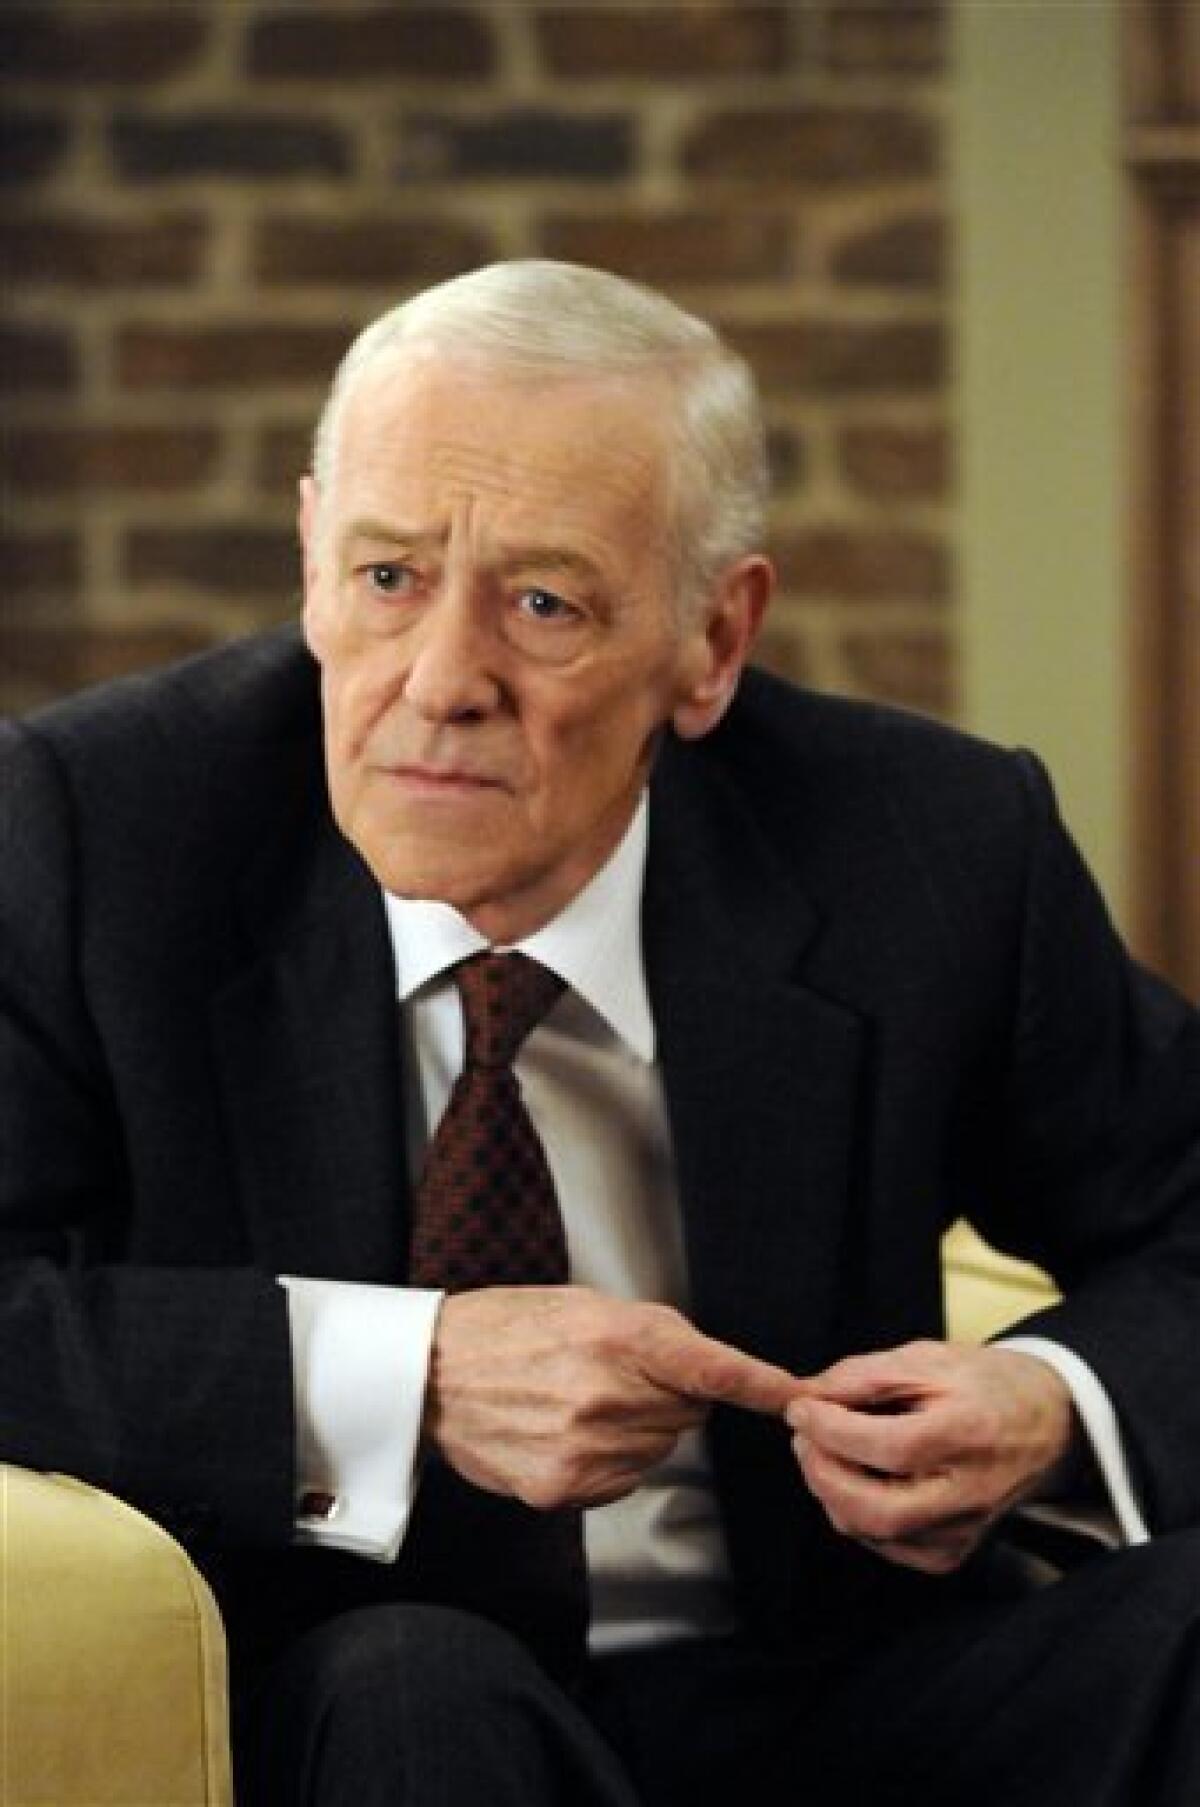 In this image released by HBO, actor John Mahoney is shown in a scene from the HBO original series, "In Treatment." The half-hour drama series begins it's second season Sunday, April 5, 2009 at 9:00 p.m. EDT. (AP Photo/HBO, Abbot Genser)